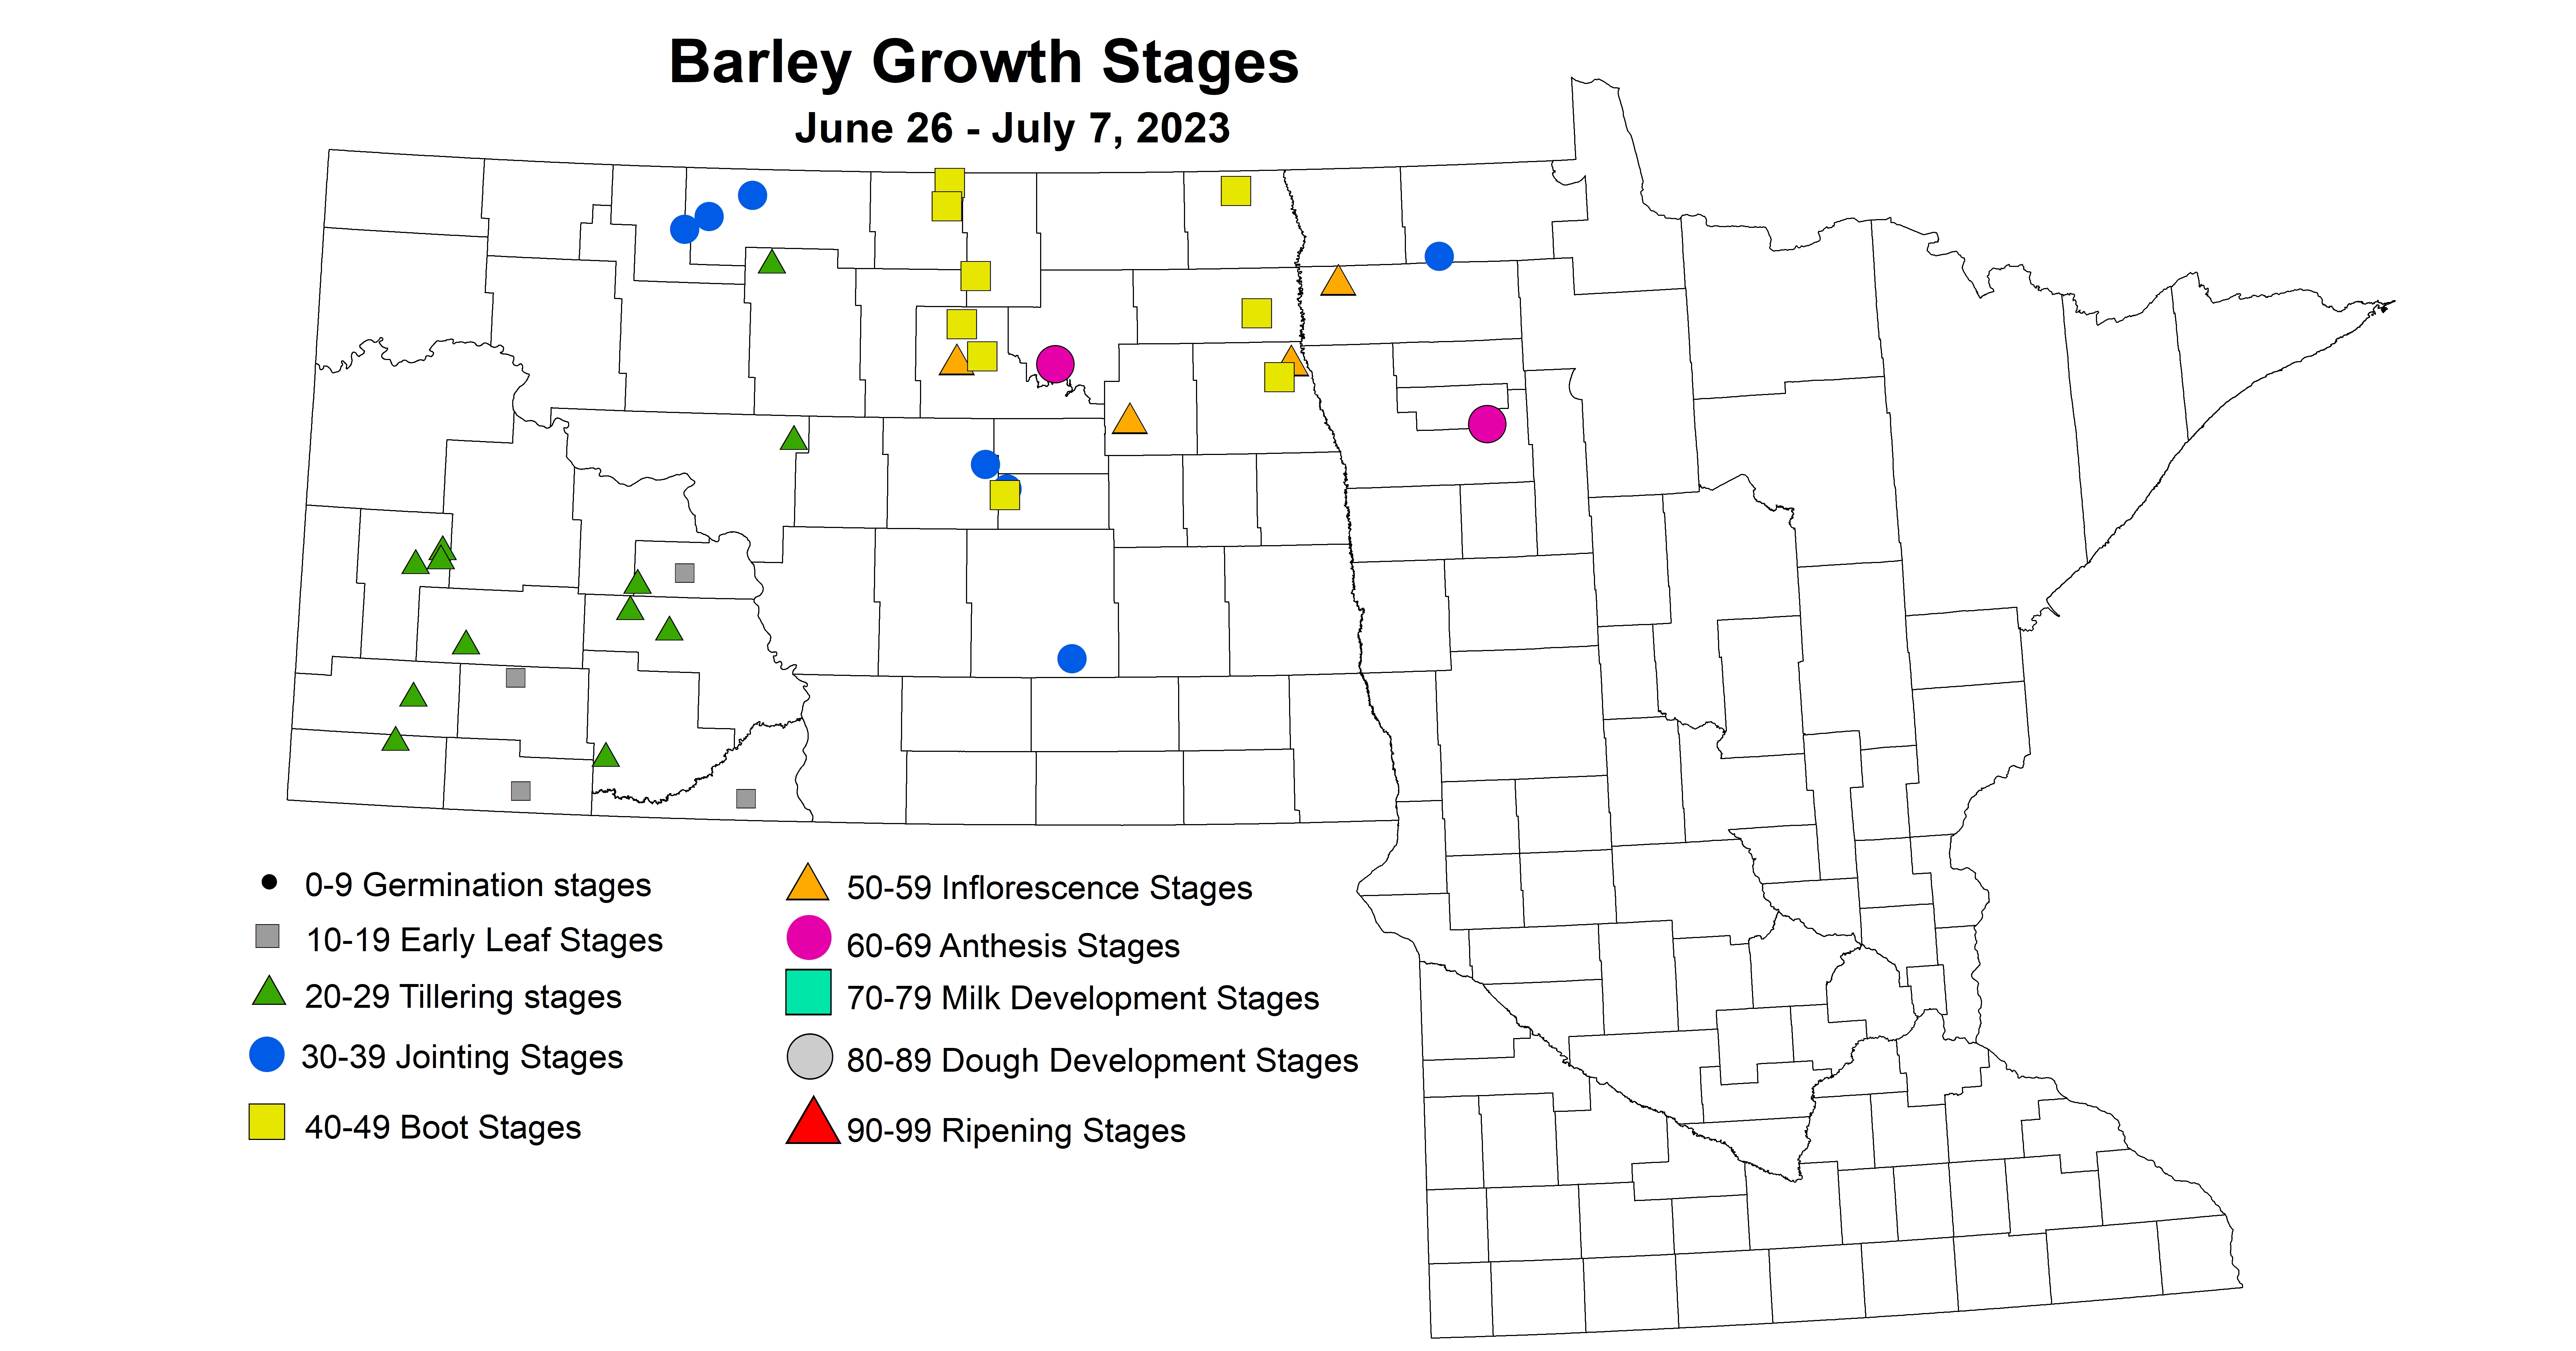 barley growth stages June 26 - July 7 2023